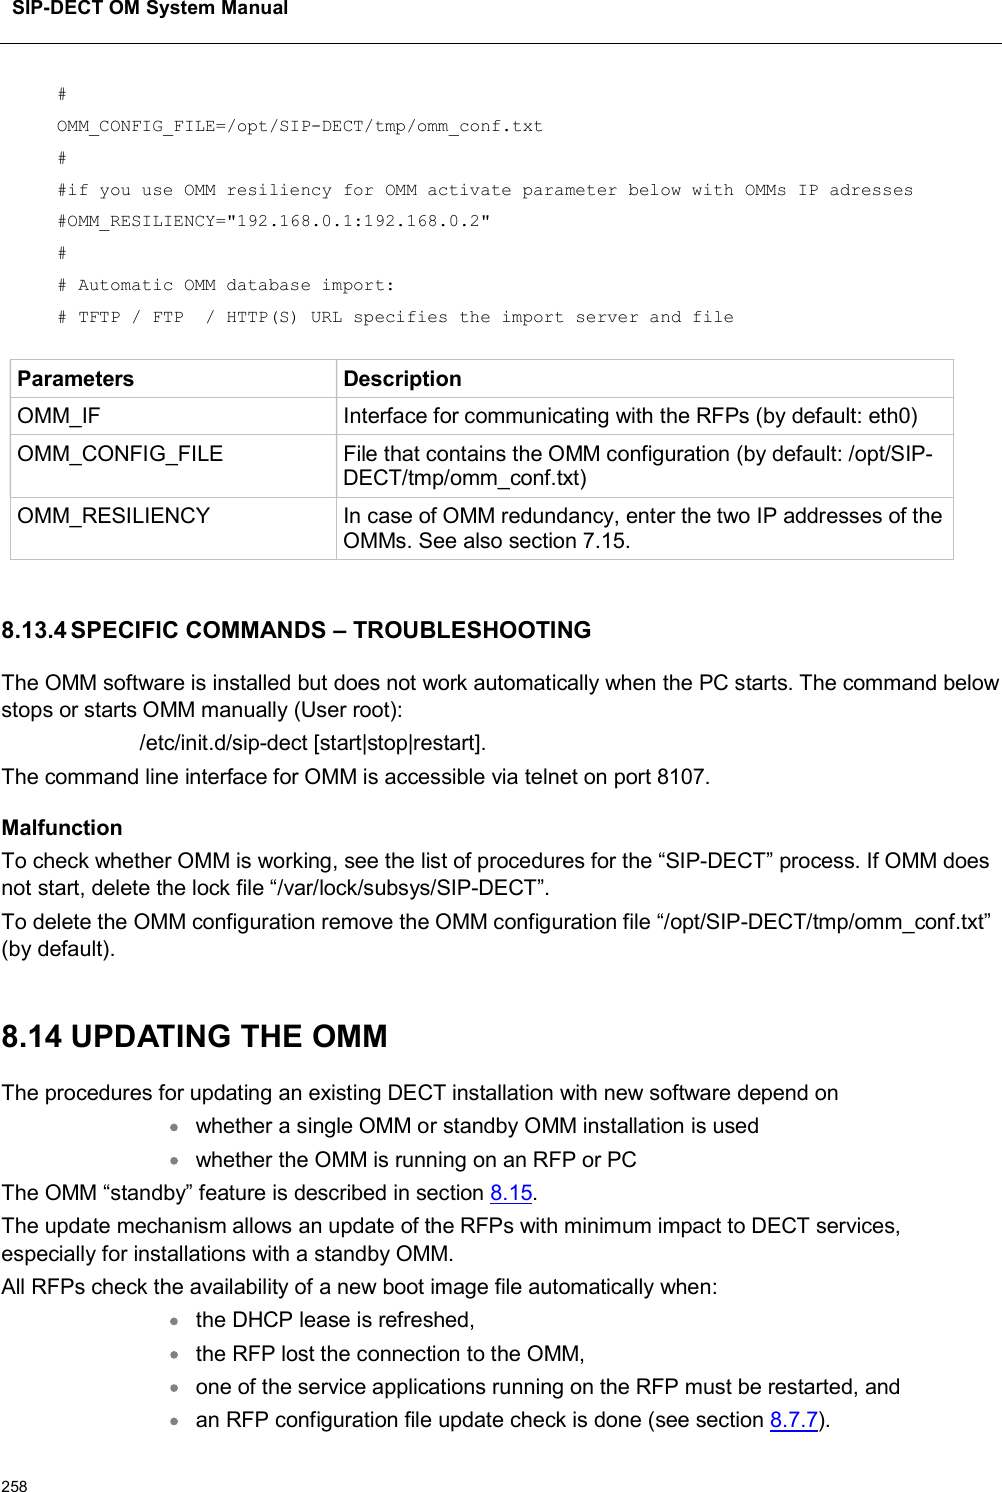 SIP-DECT OM System Manual258#OMM_CONFIG_FILE=/opt/SIP-DECT/tmp/omm_conf.txt##if you use OMM resiliency for OMM activate parameter below with OMMs IP adresses#OMM_RESILIENCY=&quot;192.168.0.1:192.168.0.2&quot;## Automatic OMM database import:# TFTP / FTP  / HTTP(S) URL specifies the import server and fileParameters DescriptionOMM_IF Interface for communicating with the RFPs (by default: eth0)OMM_CONFIG_FILE File that contains the OMM configuration (by default: /opt/SIP-DECT/tmp/omm_conf.txt)OMM_RESILIENCY In case of OMM redundancy, enter the two IP addresses of the OMMs. See also section 7.15.8.13.4 SPECIFIC COMMANDS – TROUBLESHOOTINGThe OMM software is installed but does not work automatically when the PC starts. The command below stops or starts OMM manually (User root): /etc/init.d/sip-dect [start|stop|restart].The command line interface for OMM is accessible via telnet on port 8107.MalfunctionTo check whether OMM is working, see the list of procedures for the “SIP-DECT” process. If OMM does not start, delete the lock file “/var/lock/subsys/SIP-DECT”.To delete the OMM configuration remove the OMM configuration file “/opt/SIP-DECT/tmp/omm_conf.txt” (by default).8.14 UPDATING THE OMMThe procedures for updating an existing DECT installation with new software depend on whether a single OMM or standby OMM installation is used whether the OMM is running on an RFP or PCThe OMM “standby” feature is described in section 8.15.The update mechanism allows an update of the RFPs with minimum impact to DECT services, especially for installations with a standby OMM.All RFPs check the availability of a new boot image file automatically when:the DHCP lease is refreshed,the RFP lost the connection to the OMM,one of the service applications running on the RFP must be restarted, andan RFP configuration file update check is done (see section 8.7.7).